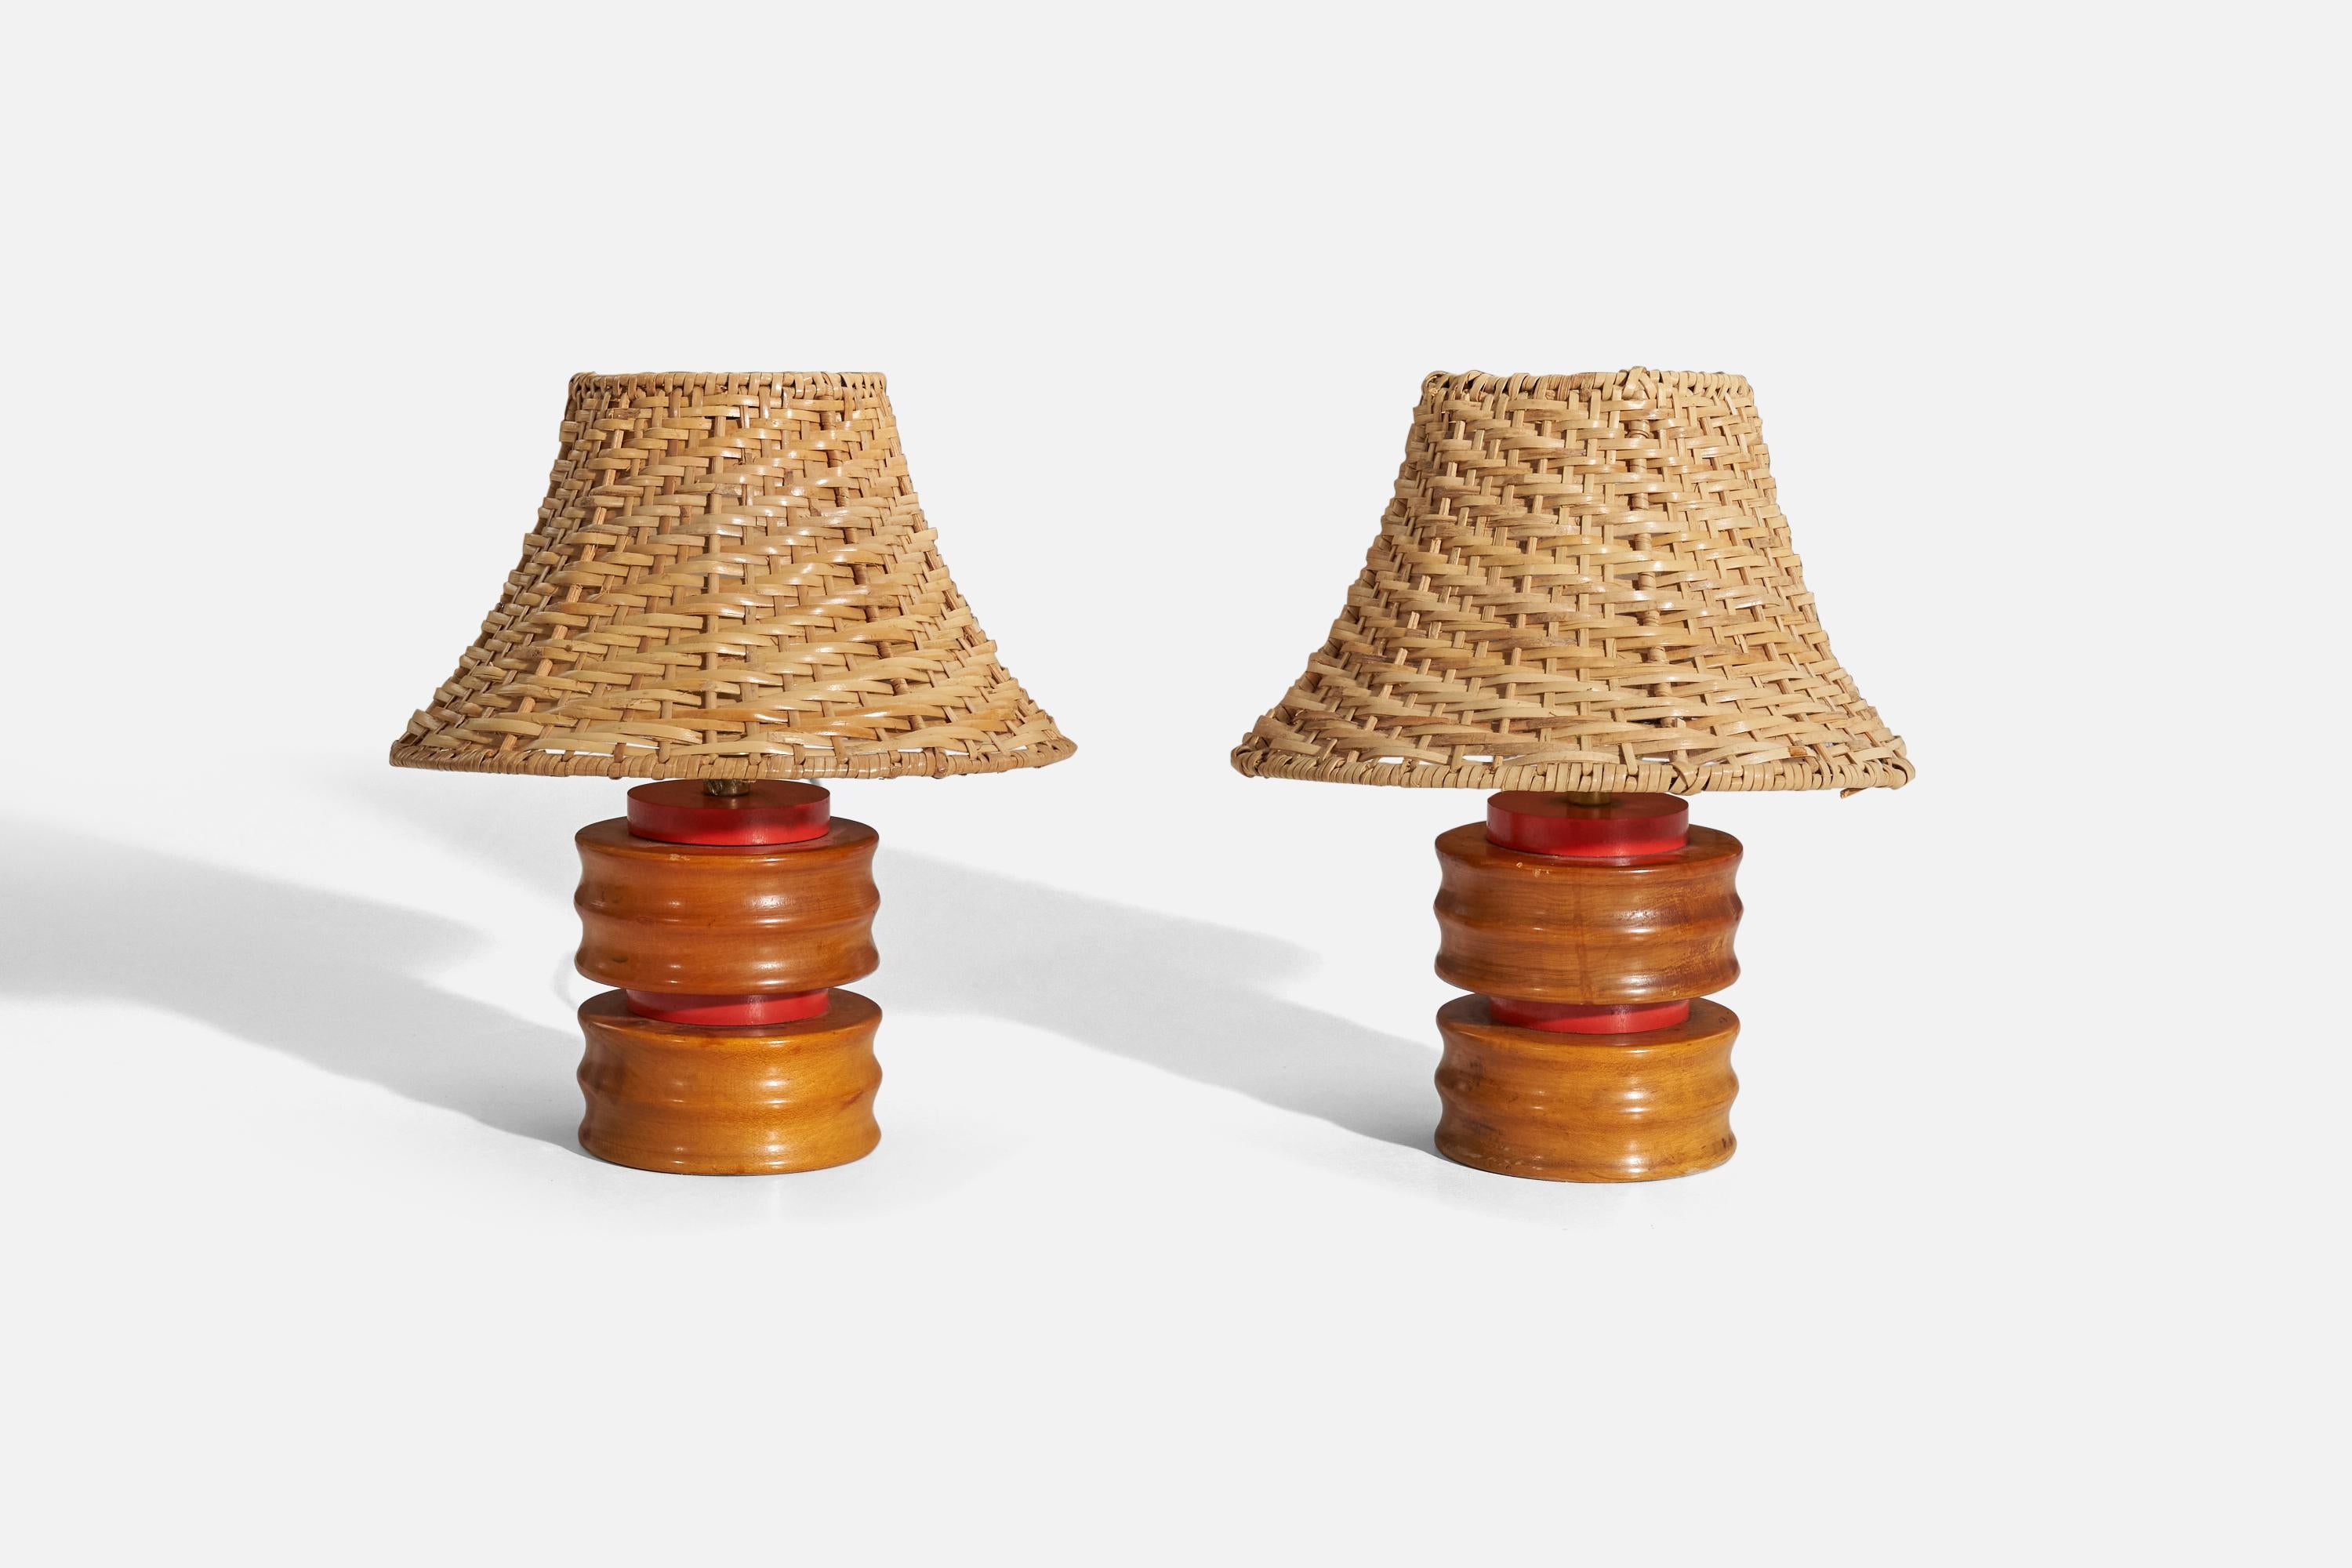 A pair of wooden table lamps designed and produced in the United States, 1960s.

Sold without lampshade. 
Dimensions of Lamp (inches) : 7.0625 x 3.875 x 3.875 (H x W x D)
Dimensions of Shade (inches) : 4 x 8.75 x 5.5 (T x B x H)
Dimension of